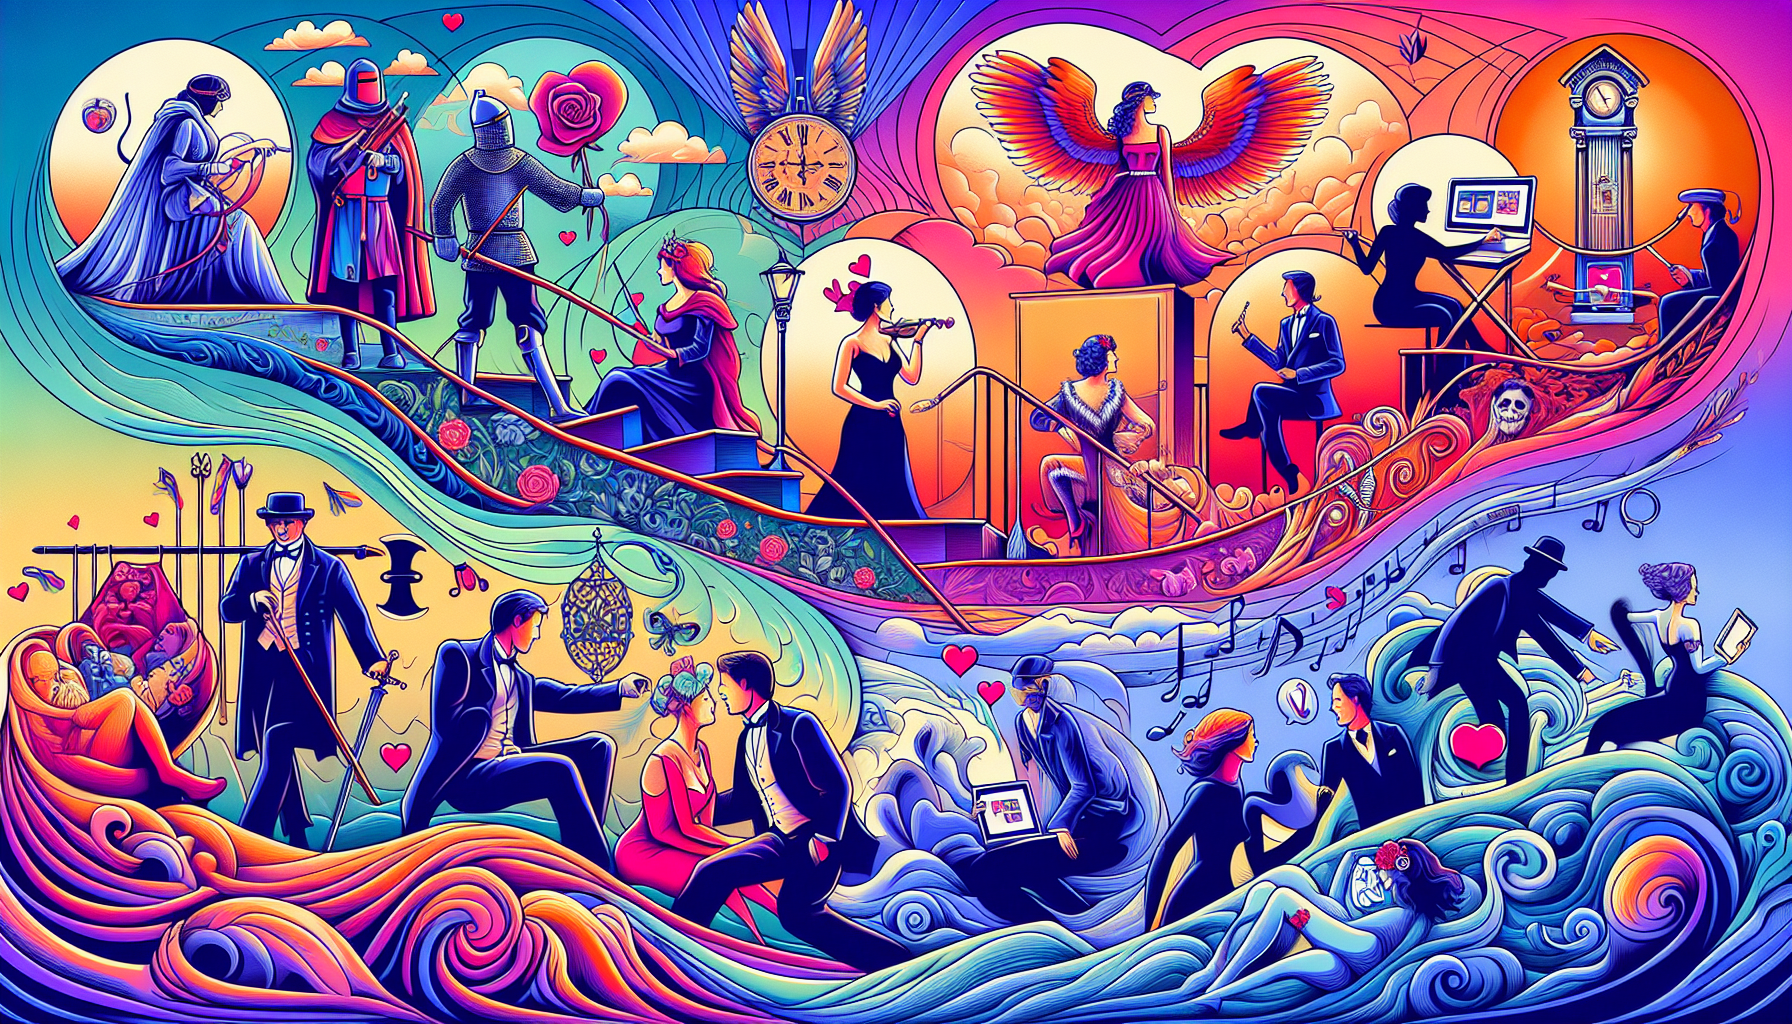 A vibrant and contemporary illustration showcasing the evolution of romantic archetypes and tropes. The scene begins with old-school courtship tropes like knights and damsels, evolves through Victorian-era romantic symbolism, touches upon flapper-style romance of the 1920s, and exhibits modern-day soulmates navigating through digital dating. Each era's unique romantic behaviours and symbols are depicted in an abstract, thought-provoking manner, with vivid colors and gracefully flowing lines creating a sense of continuity, demonstrating how love evolves but essentially retains its purity and charm.